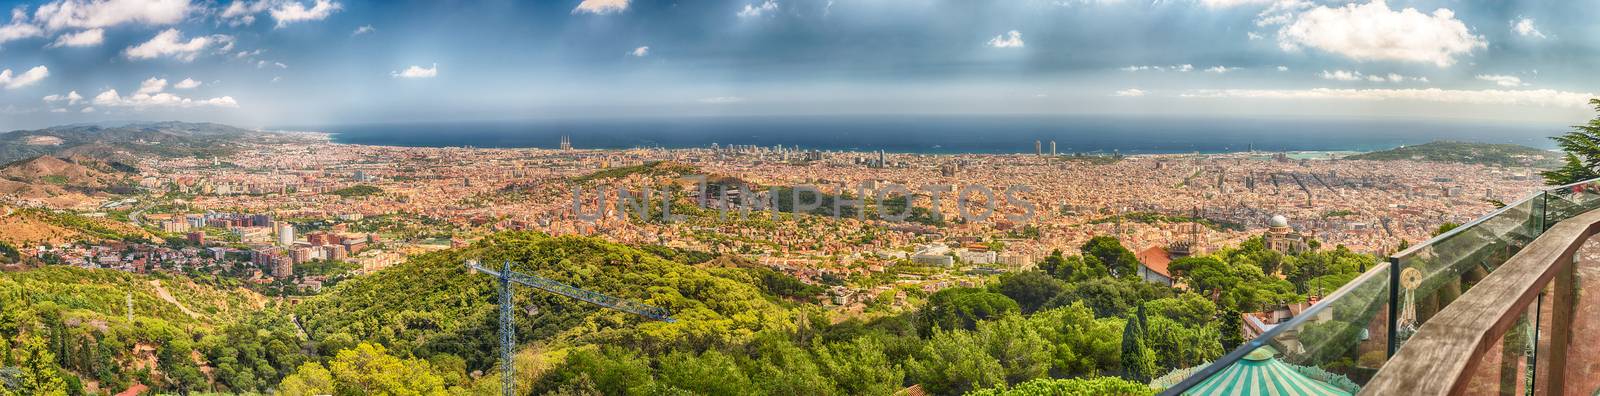 Panoramic aerial view from Tibidabo mountain over the city of Barcelona, Catalonia, Spain